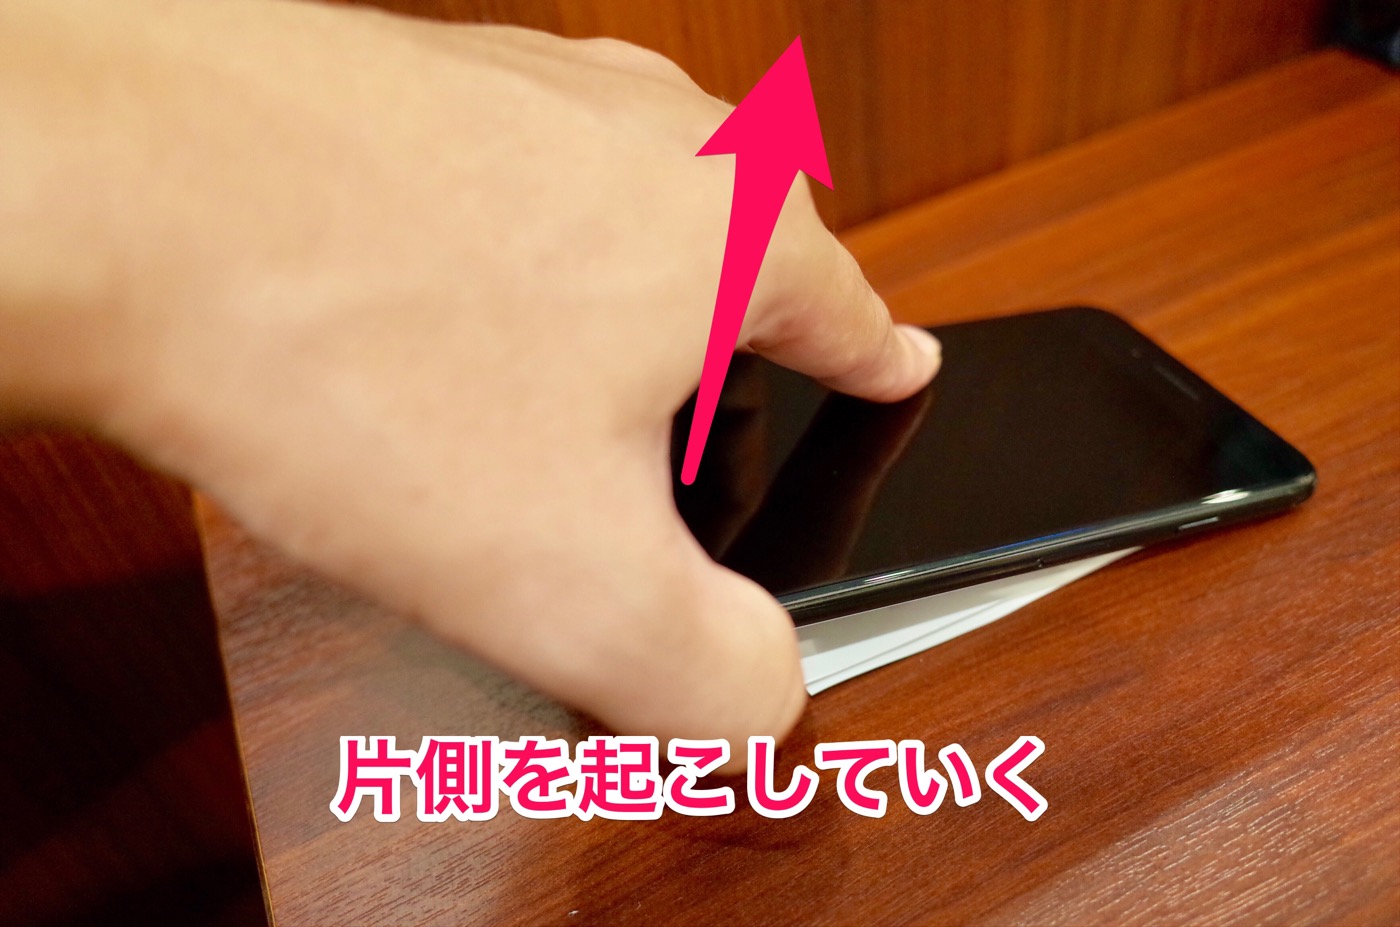 iphone-nfc-reader-tips004